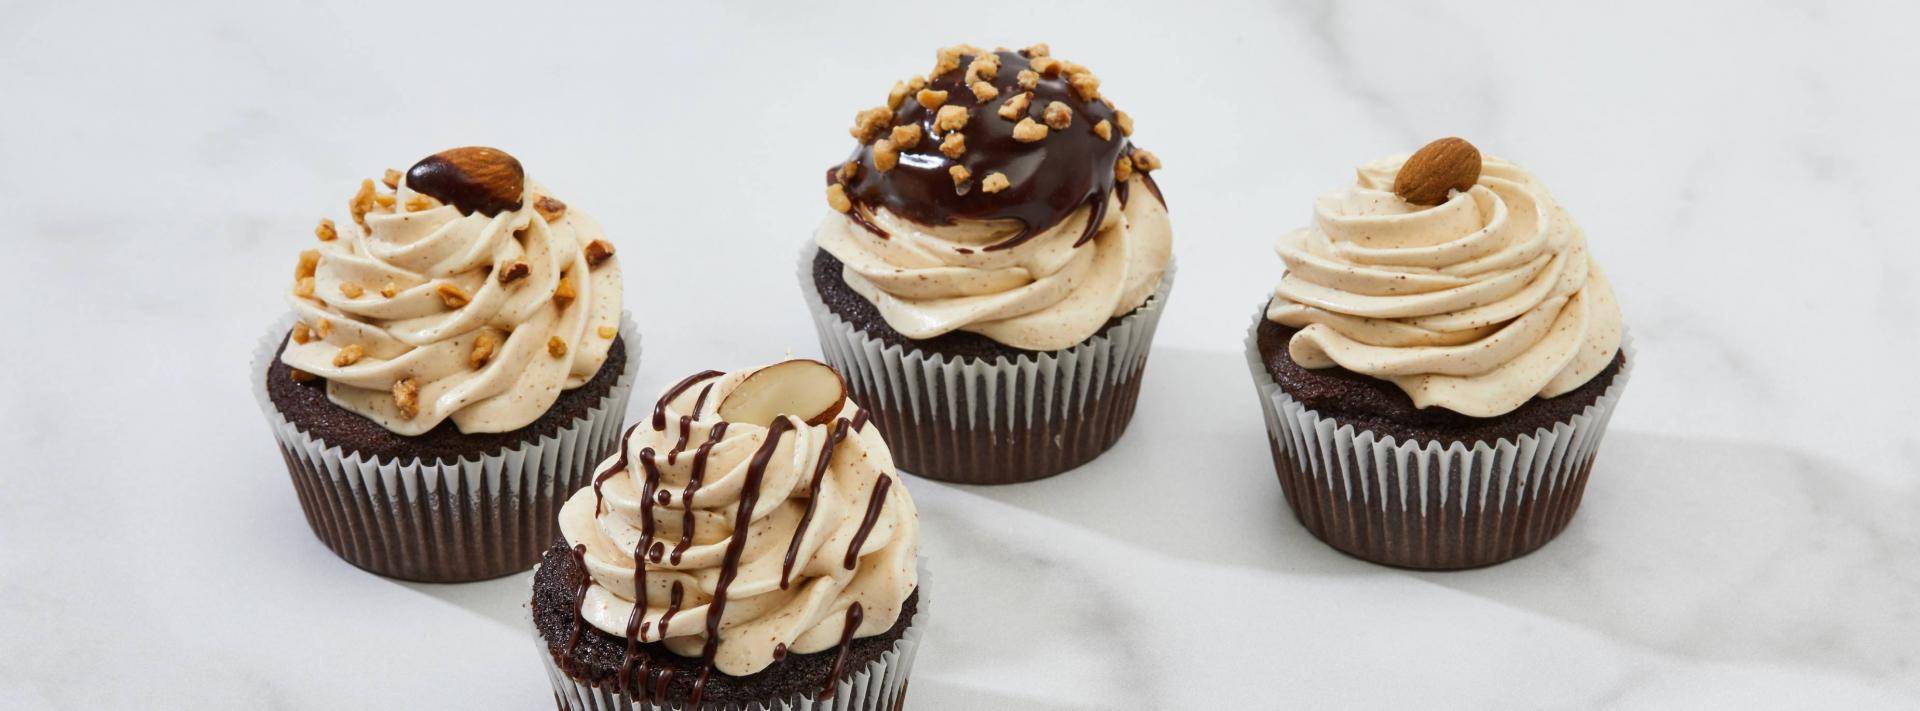 chocolate almond cupcakes on a table cloth